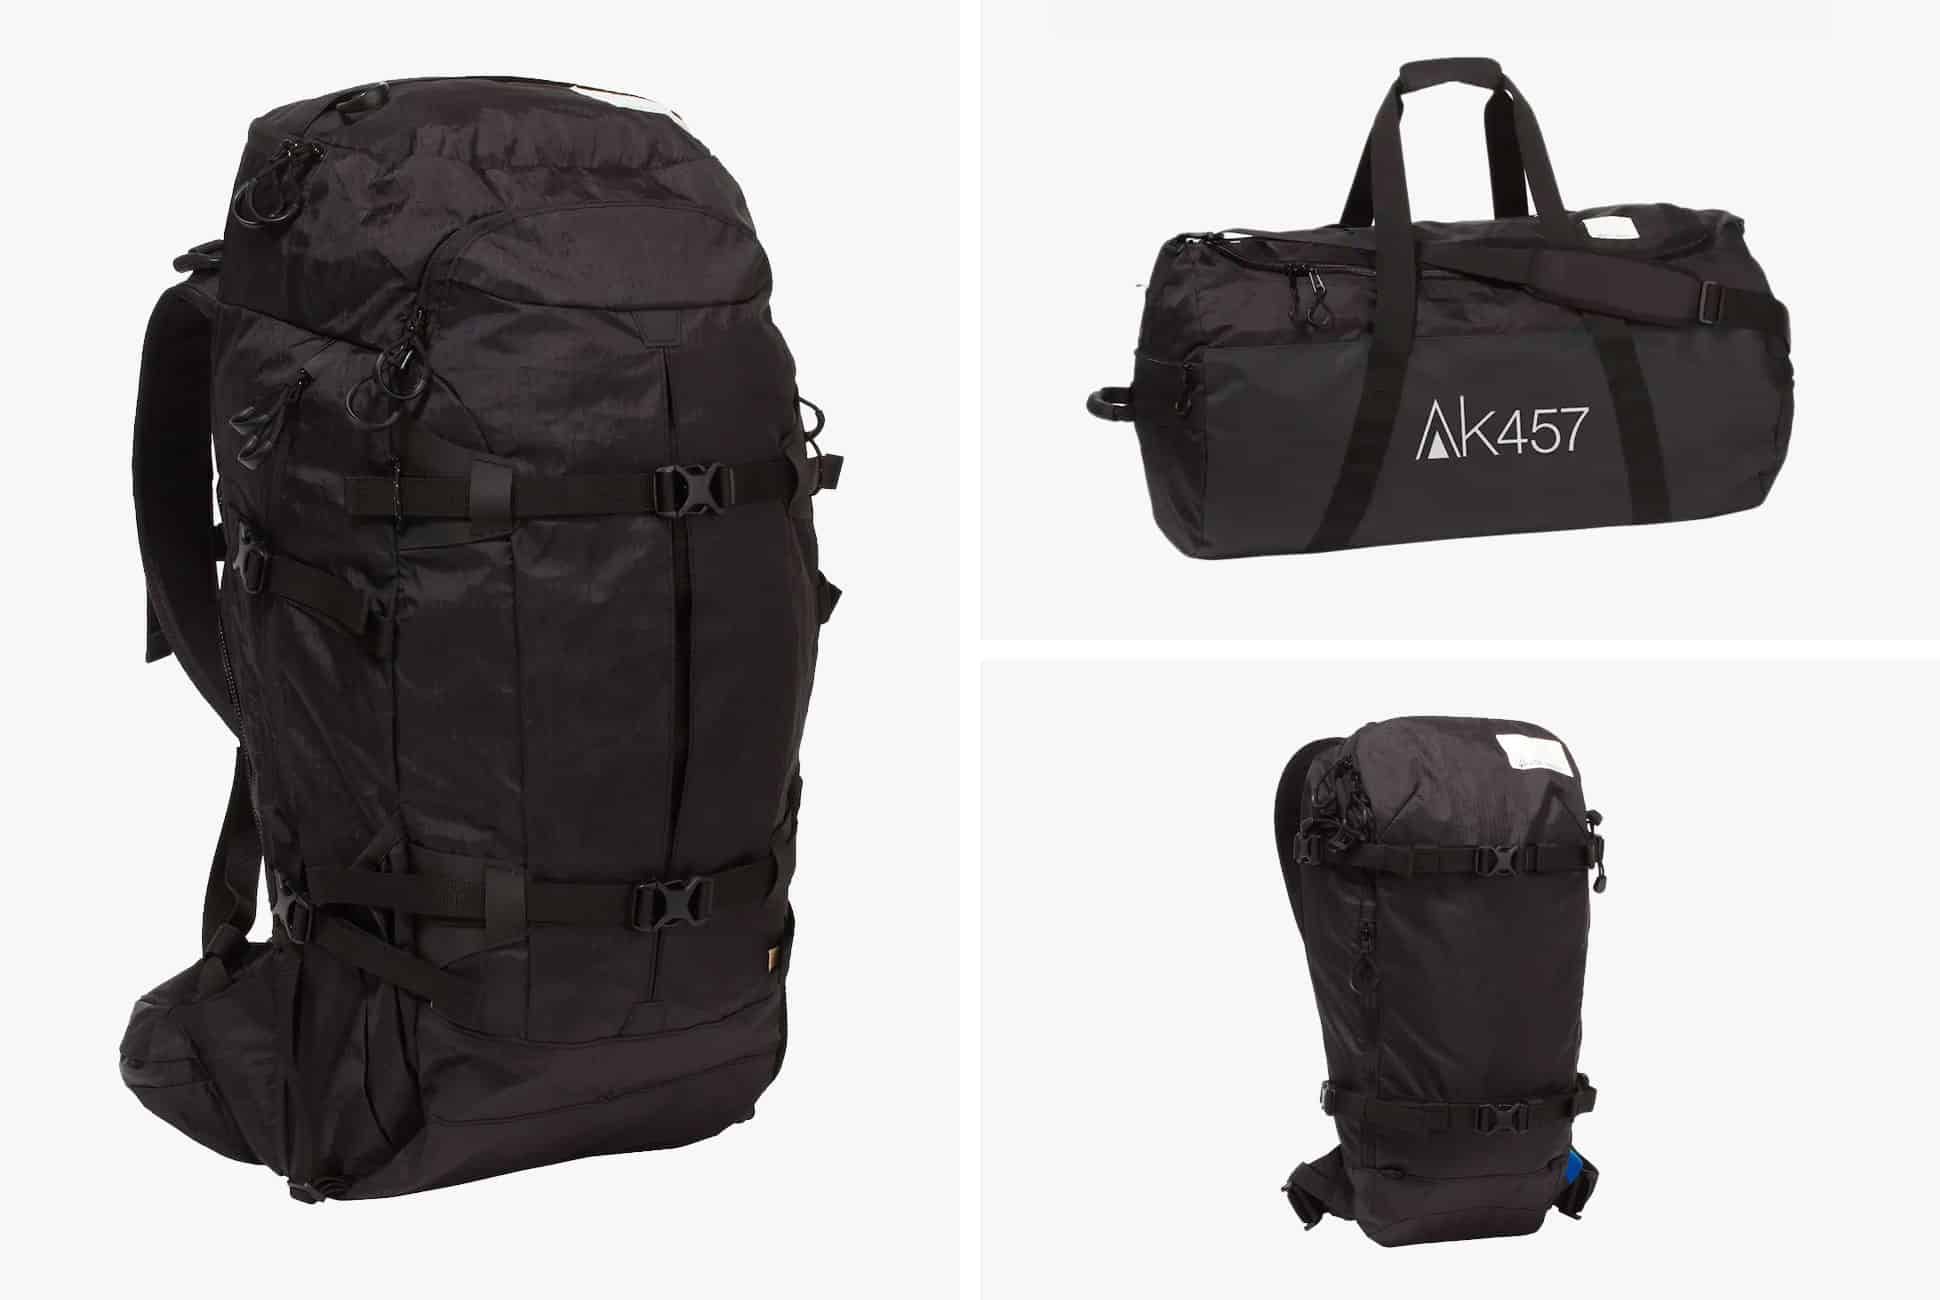 We Want Burton's New AK457 Bags, Even Though We Can't Have Them